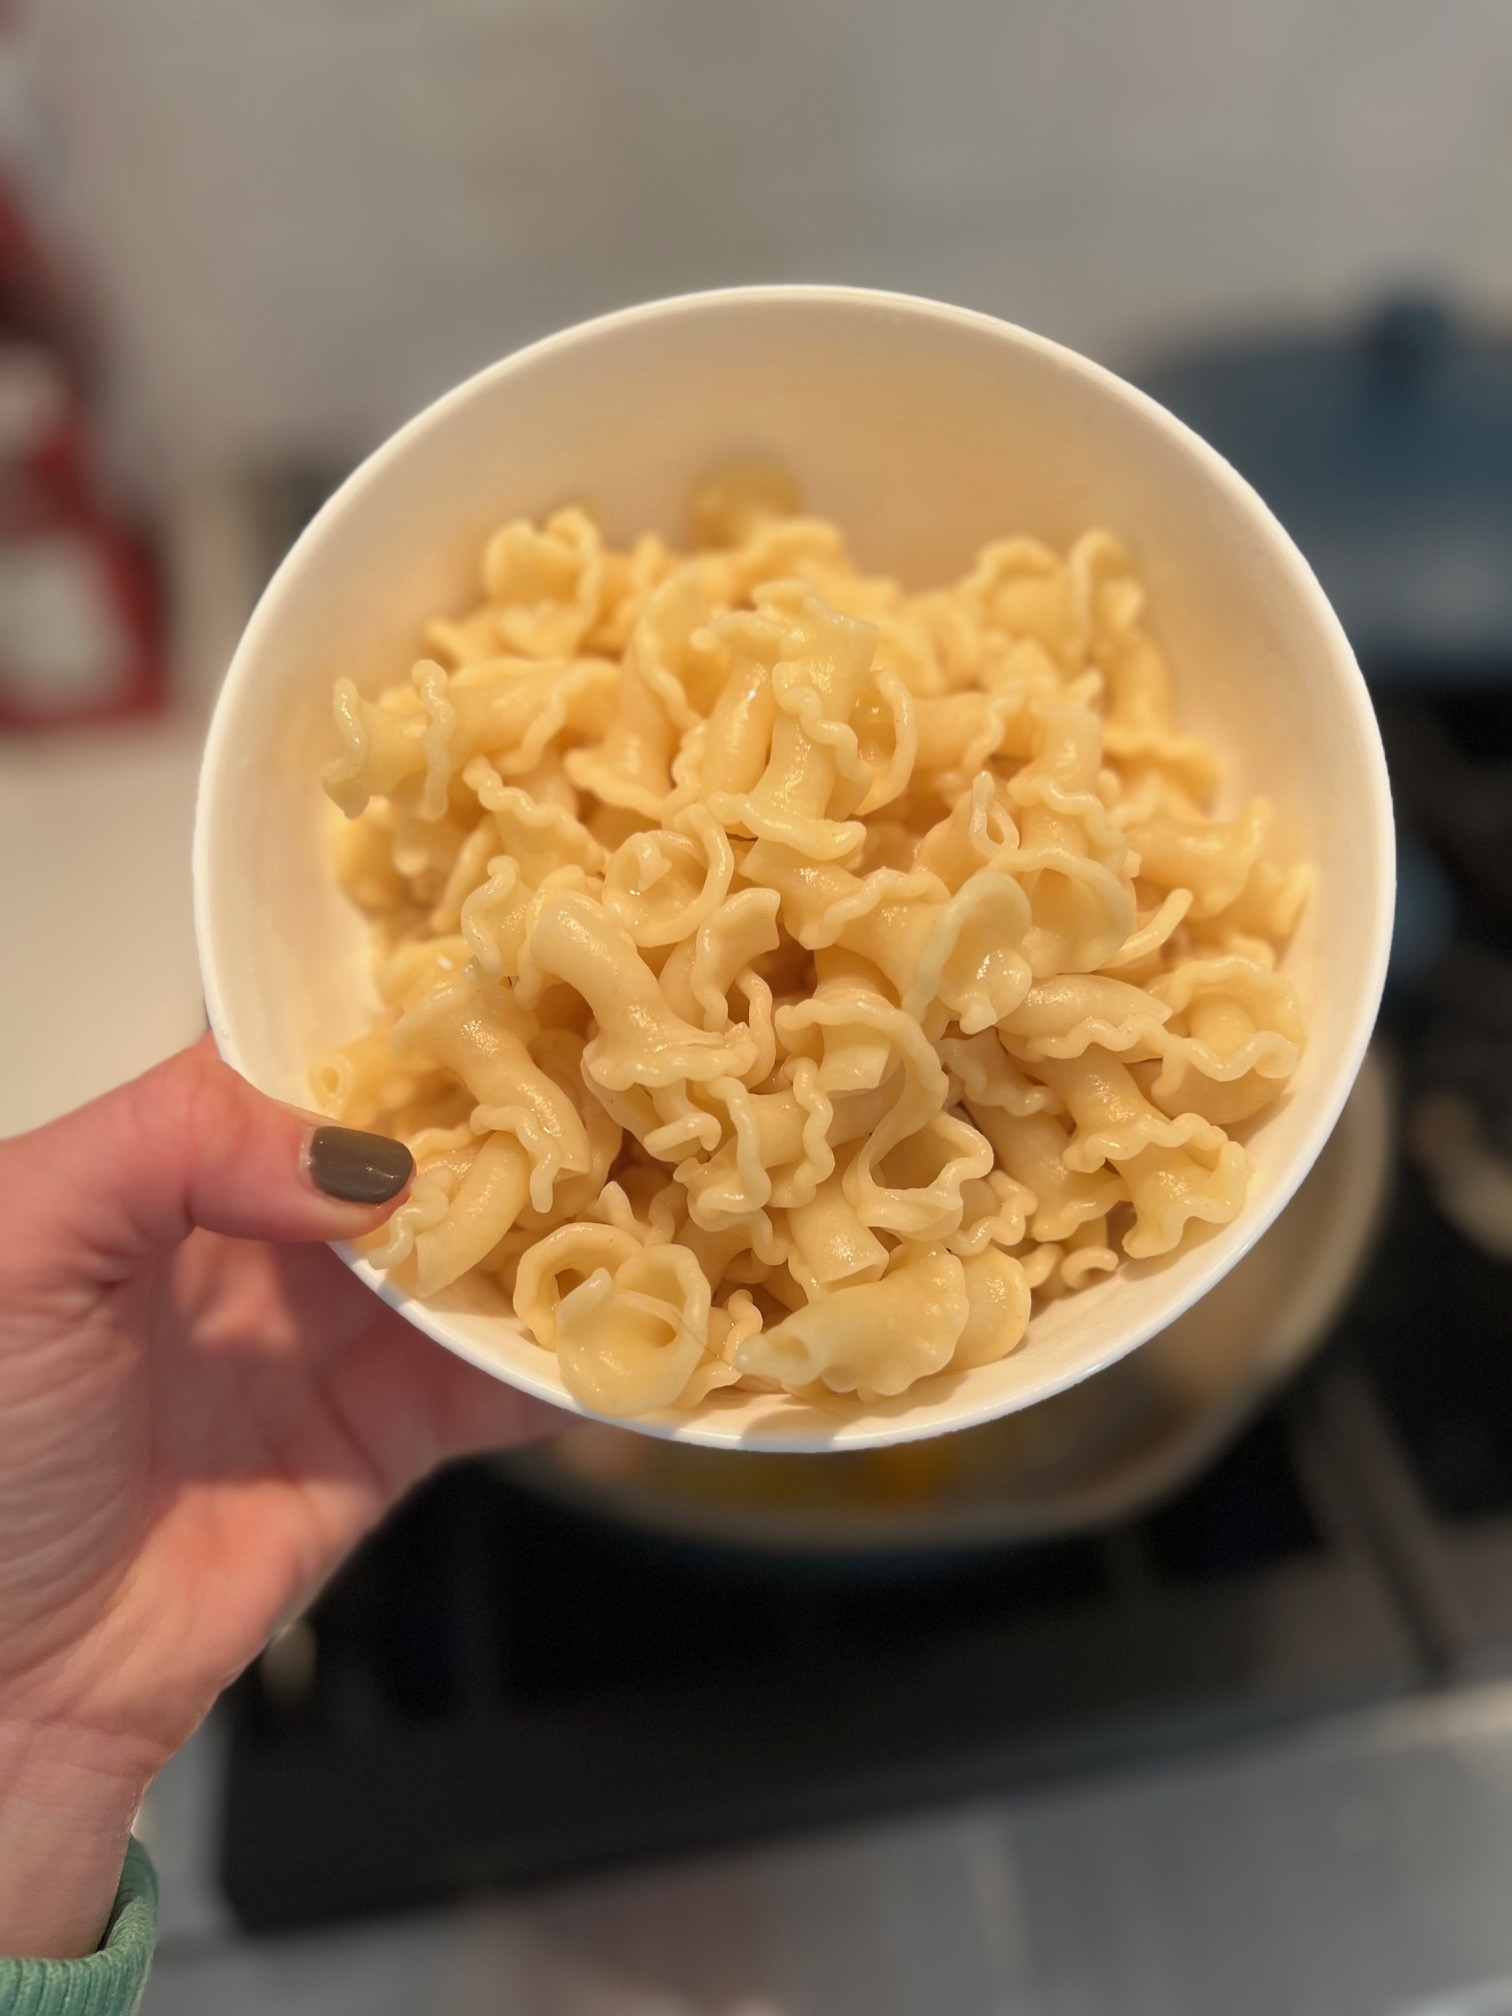 A bowl of cooked pasta